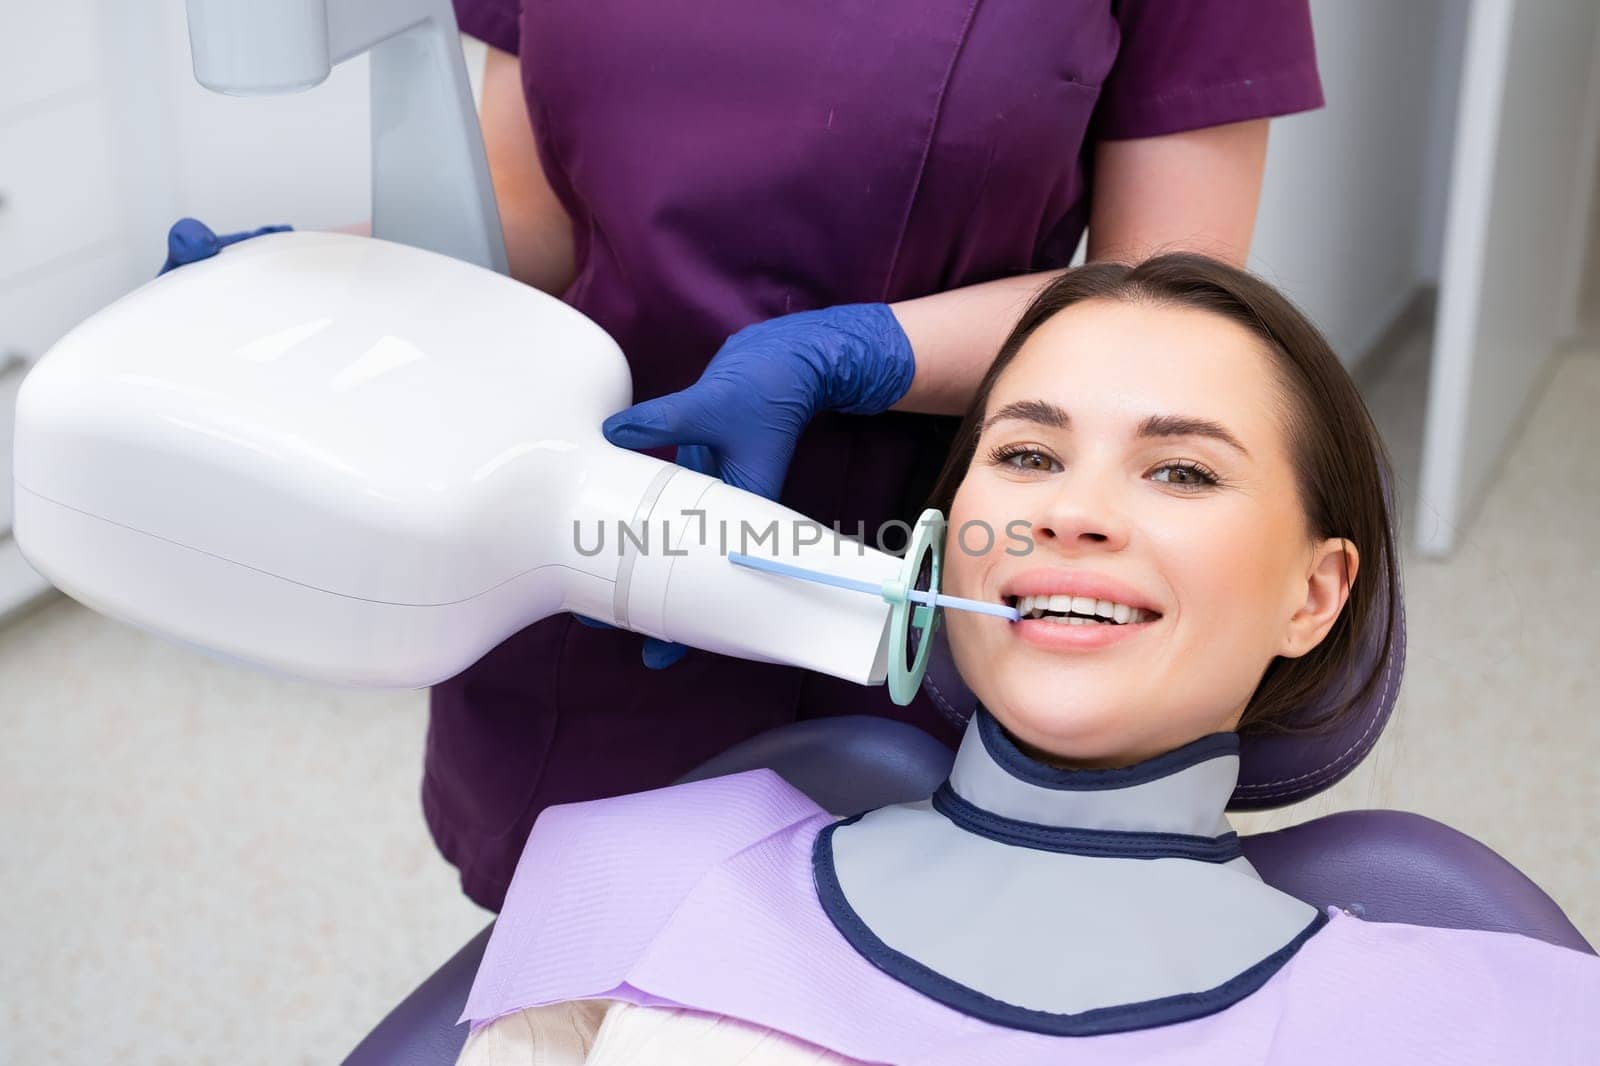 Process of preparation of patient before dental X-ray procedure. Woman instructs patient on how to tilt head before dental X-ray procedure